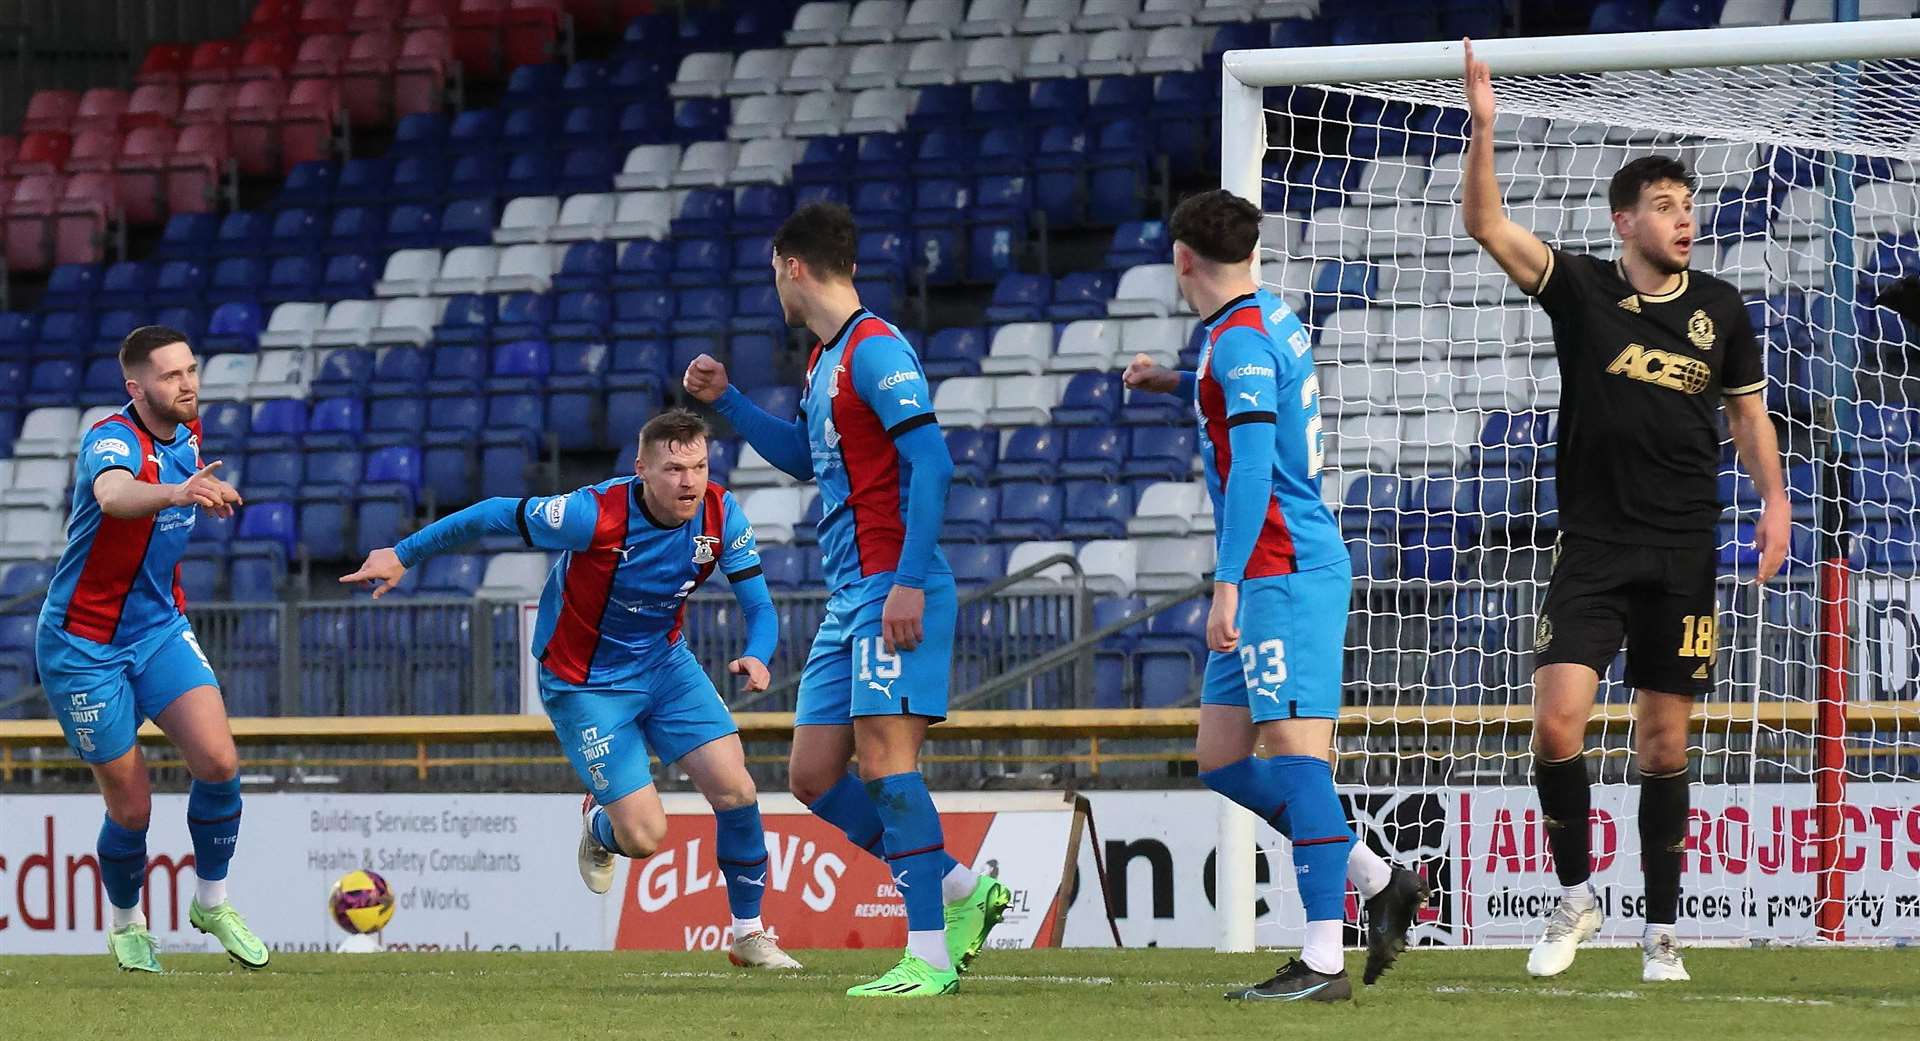 Caley Thistle have won their last two matches.